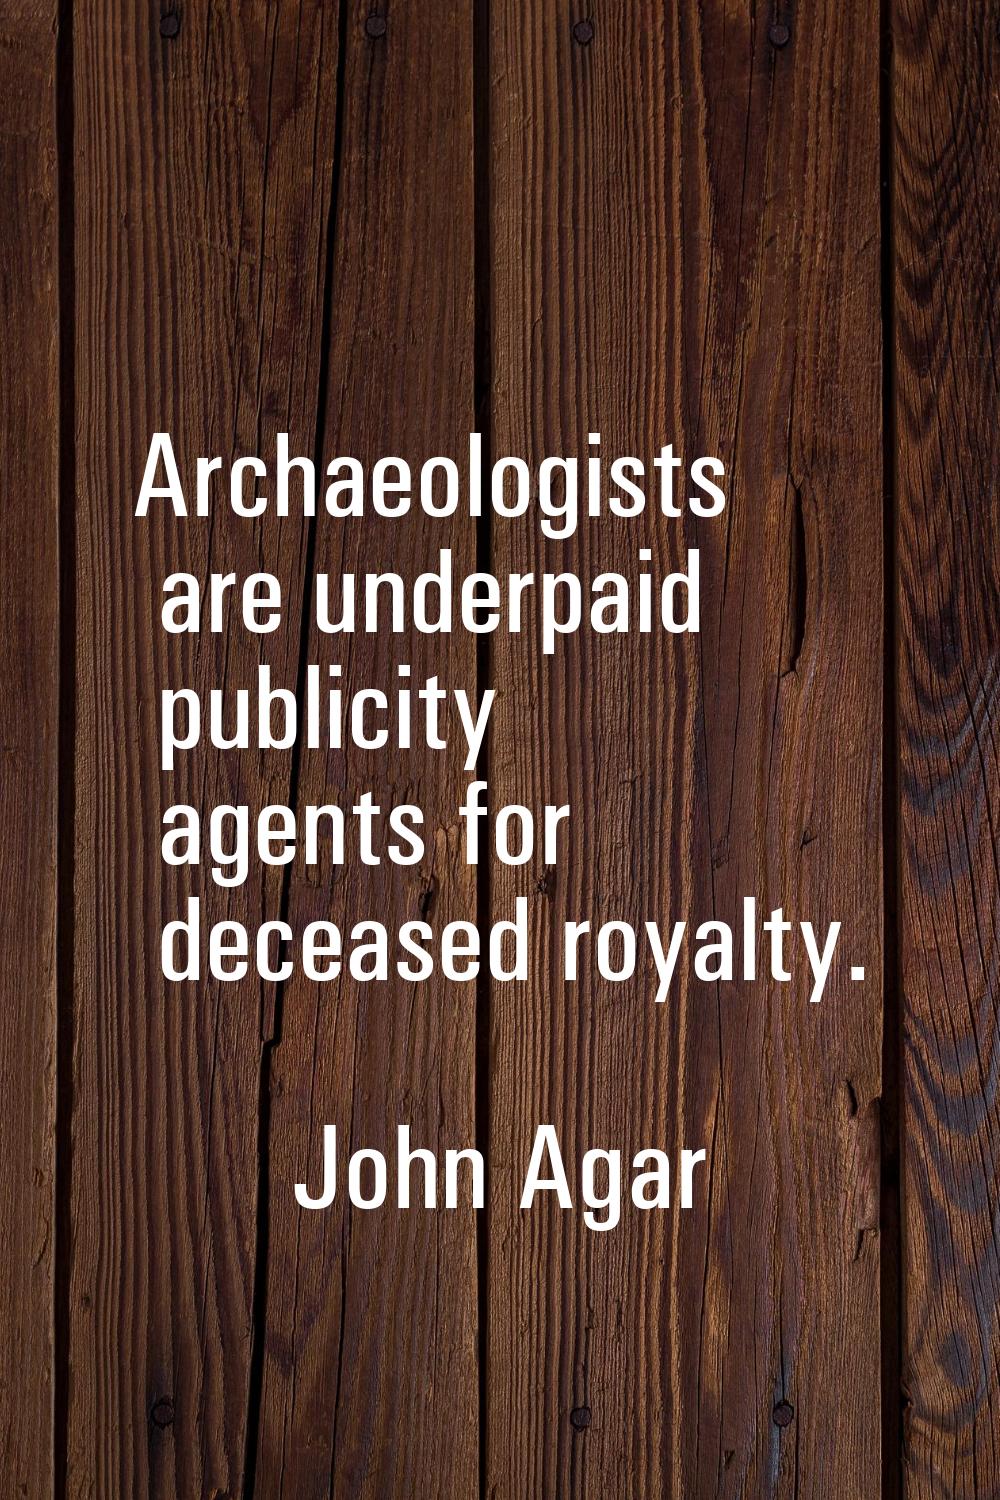 Archaeologists are underpaid publicity agents for deceased royalty.